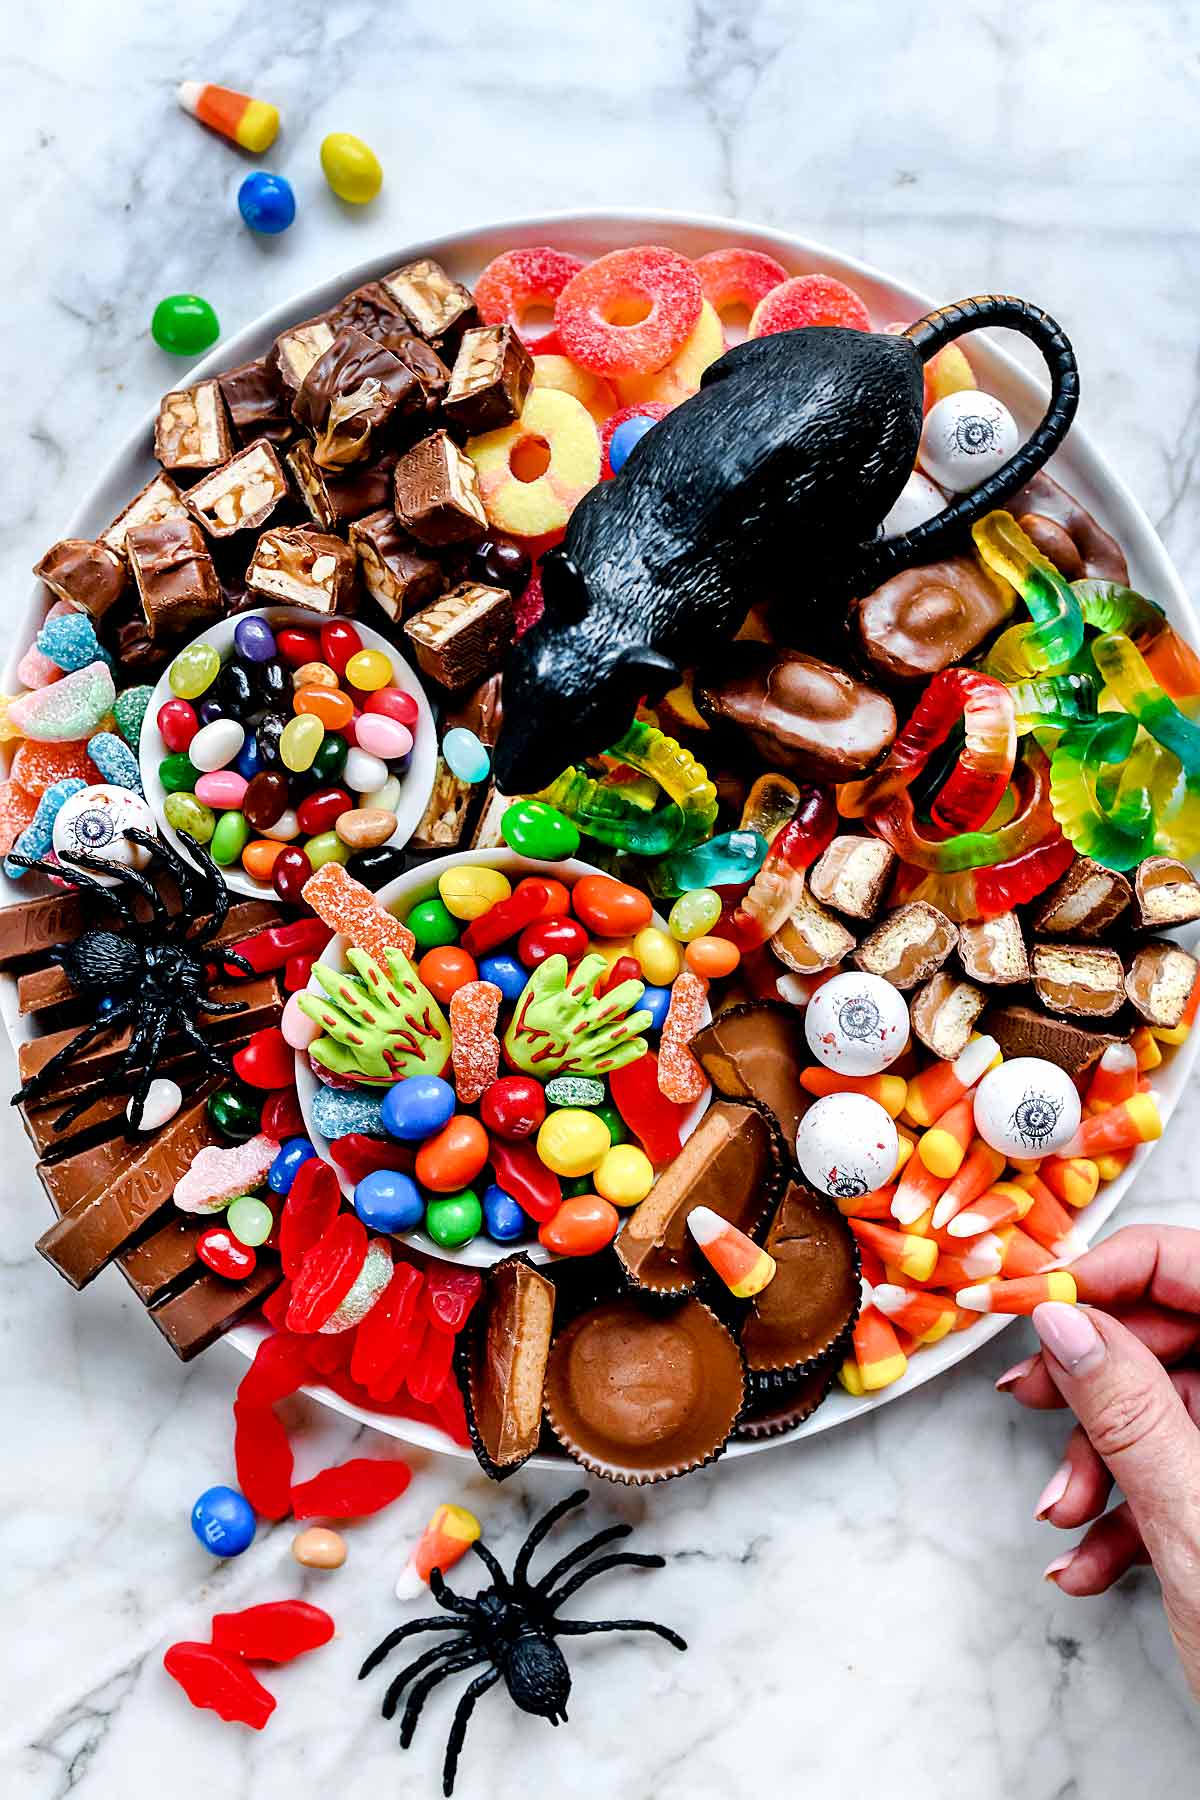 How to Make a Candy Charcuterie Board - foodiecrush .com